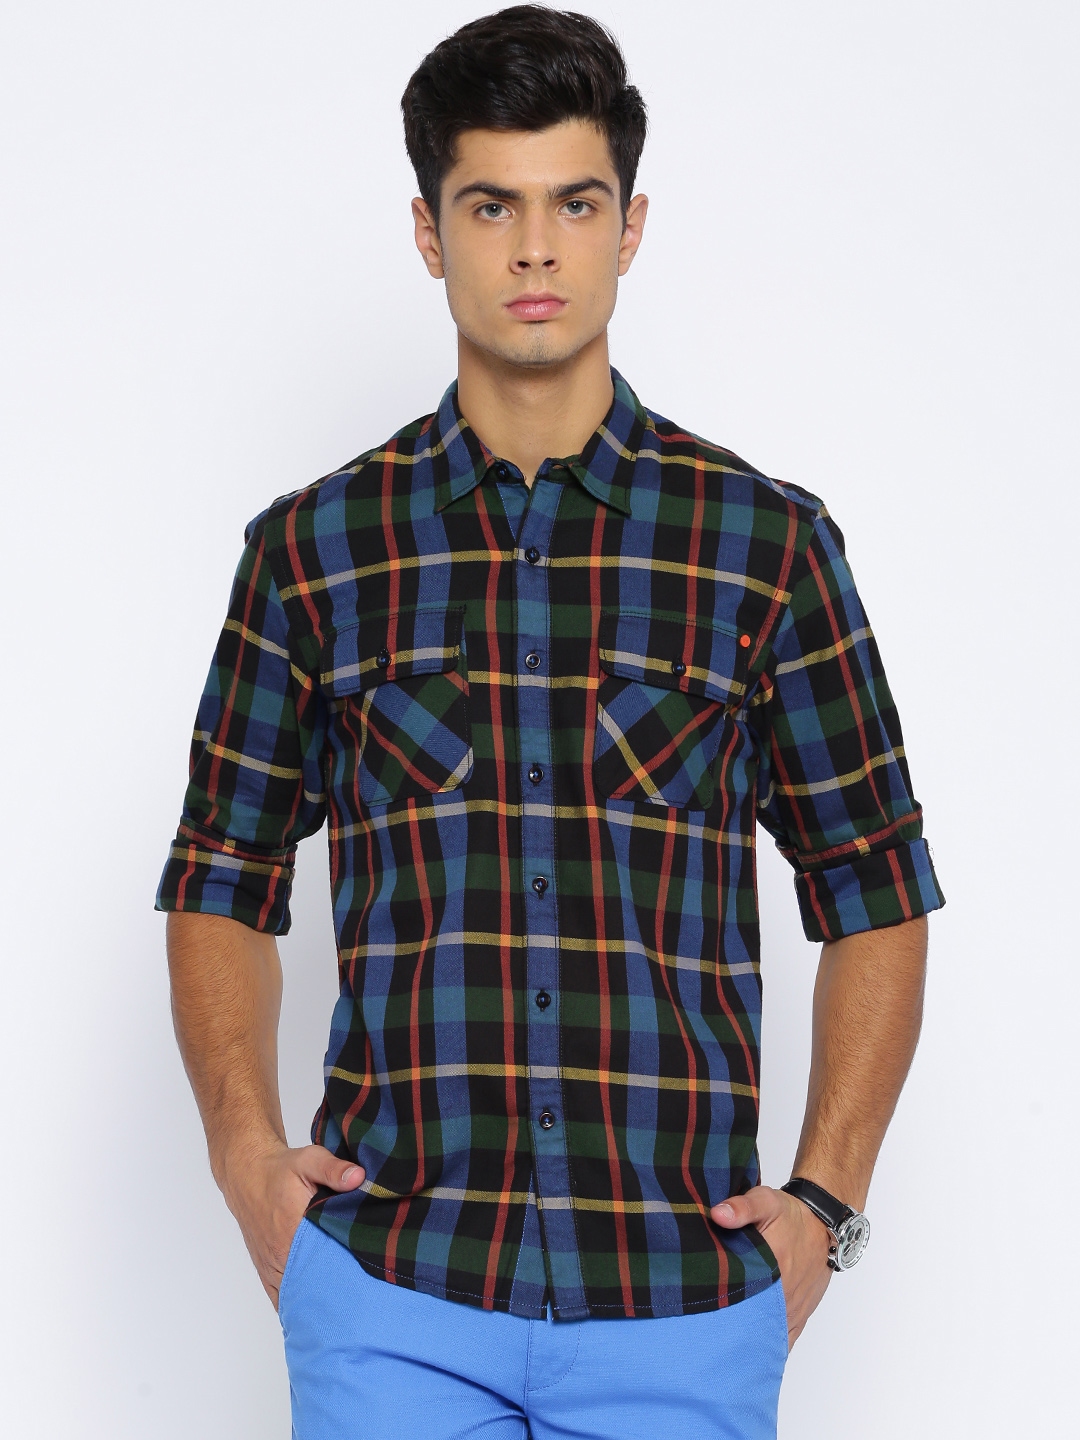 Buy Lee Black & Blue Checked Casual Shirt - Shirts for Men 953536 | Myntra